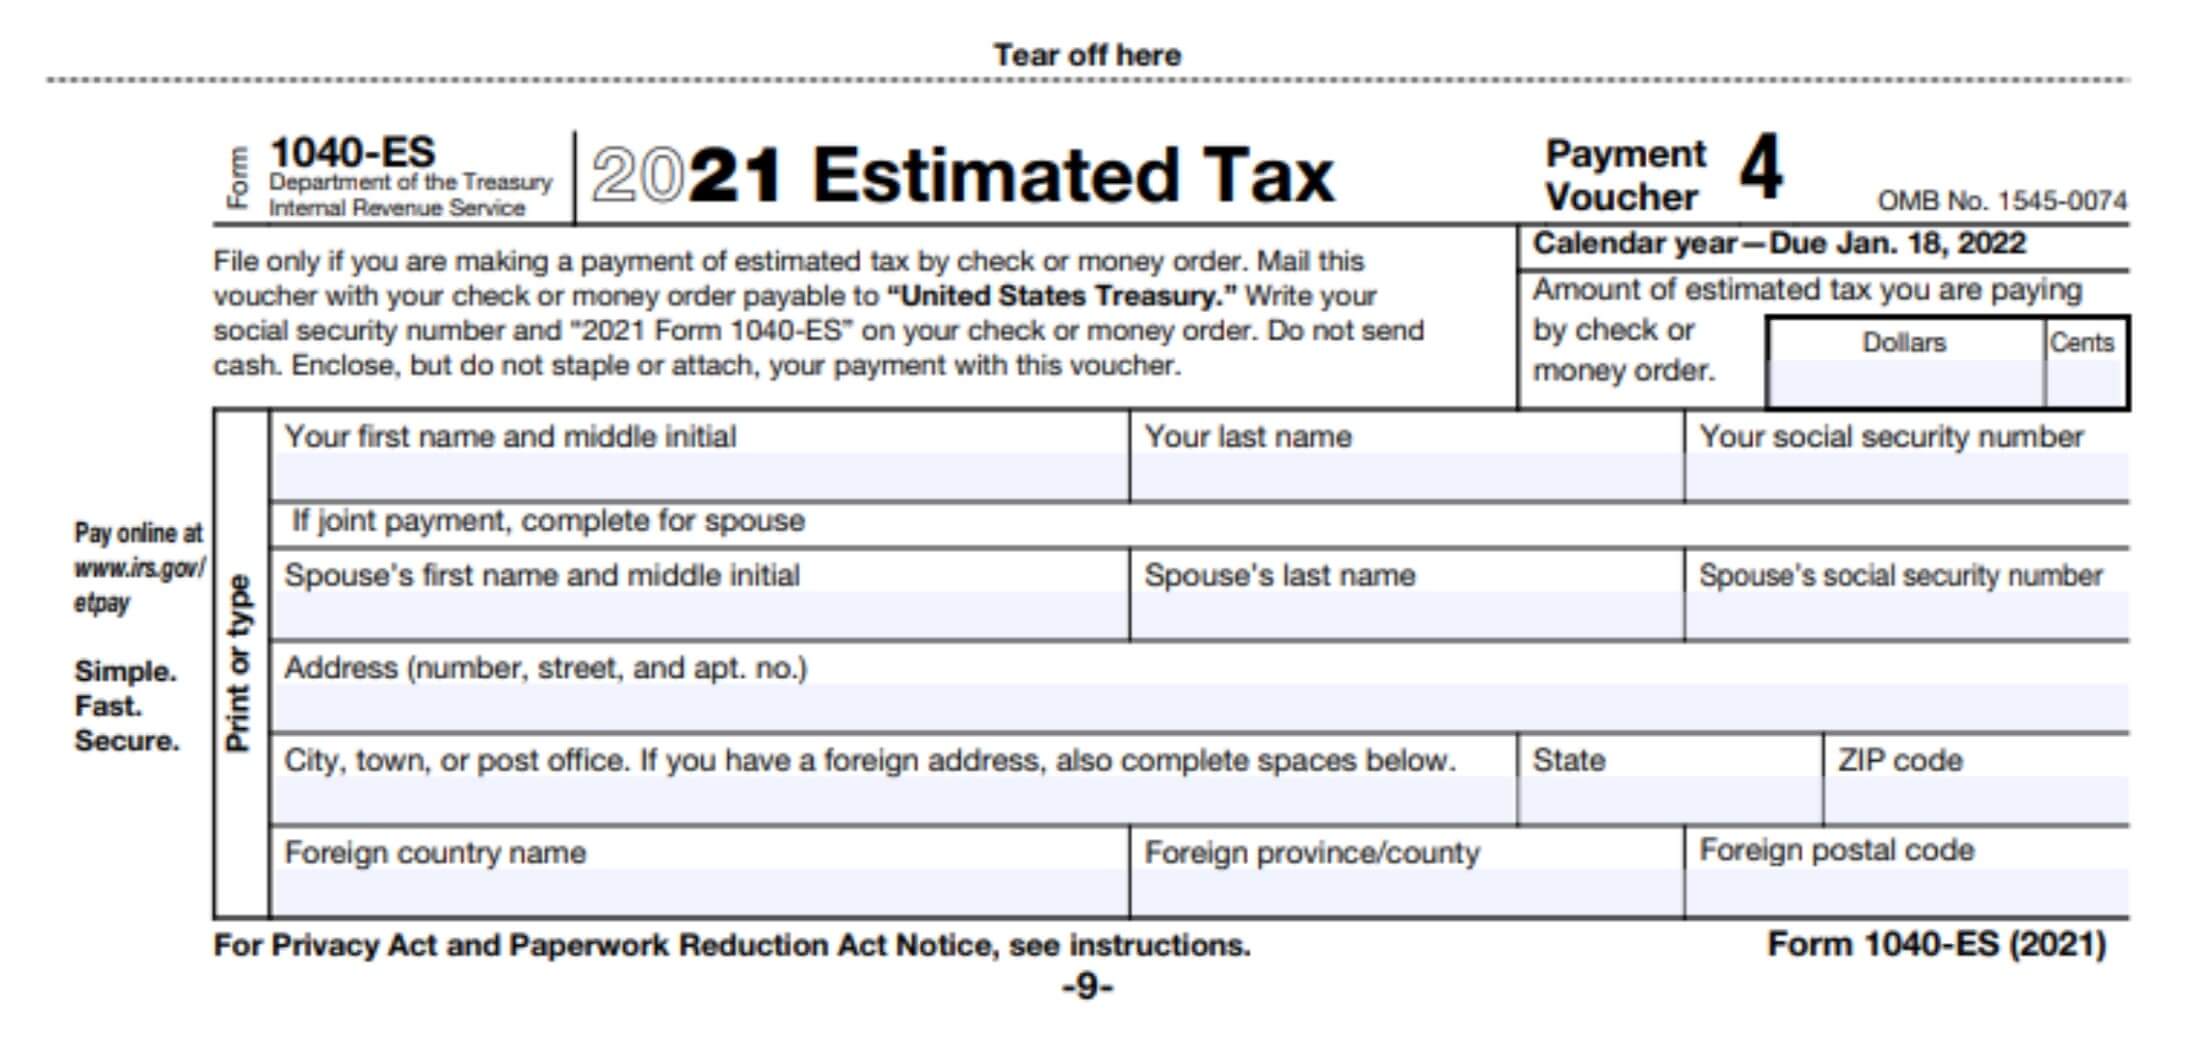 irs form 1040-es example image